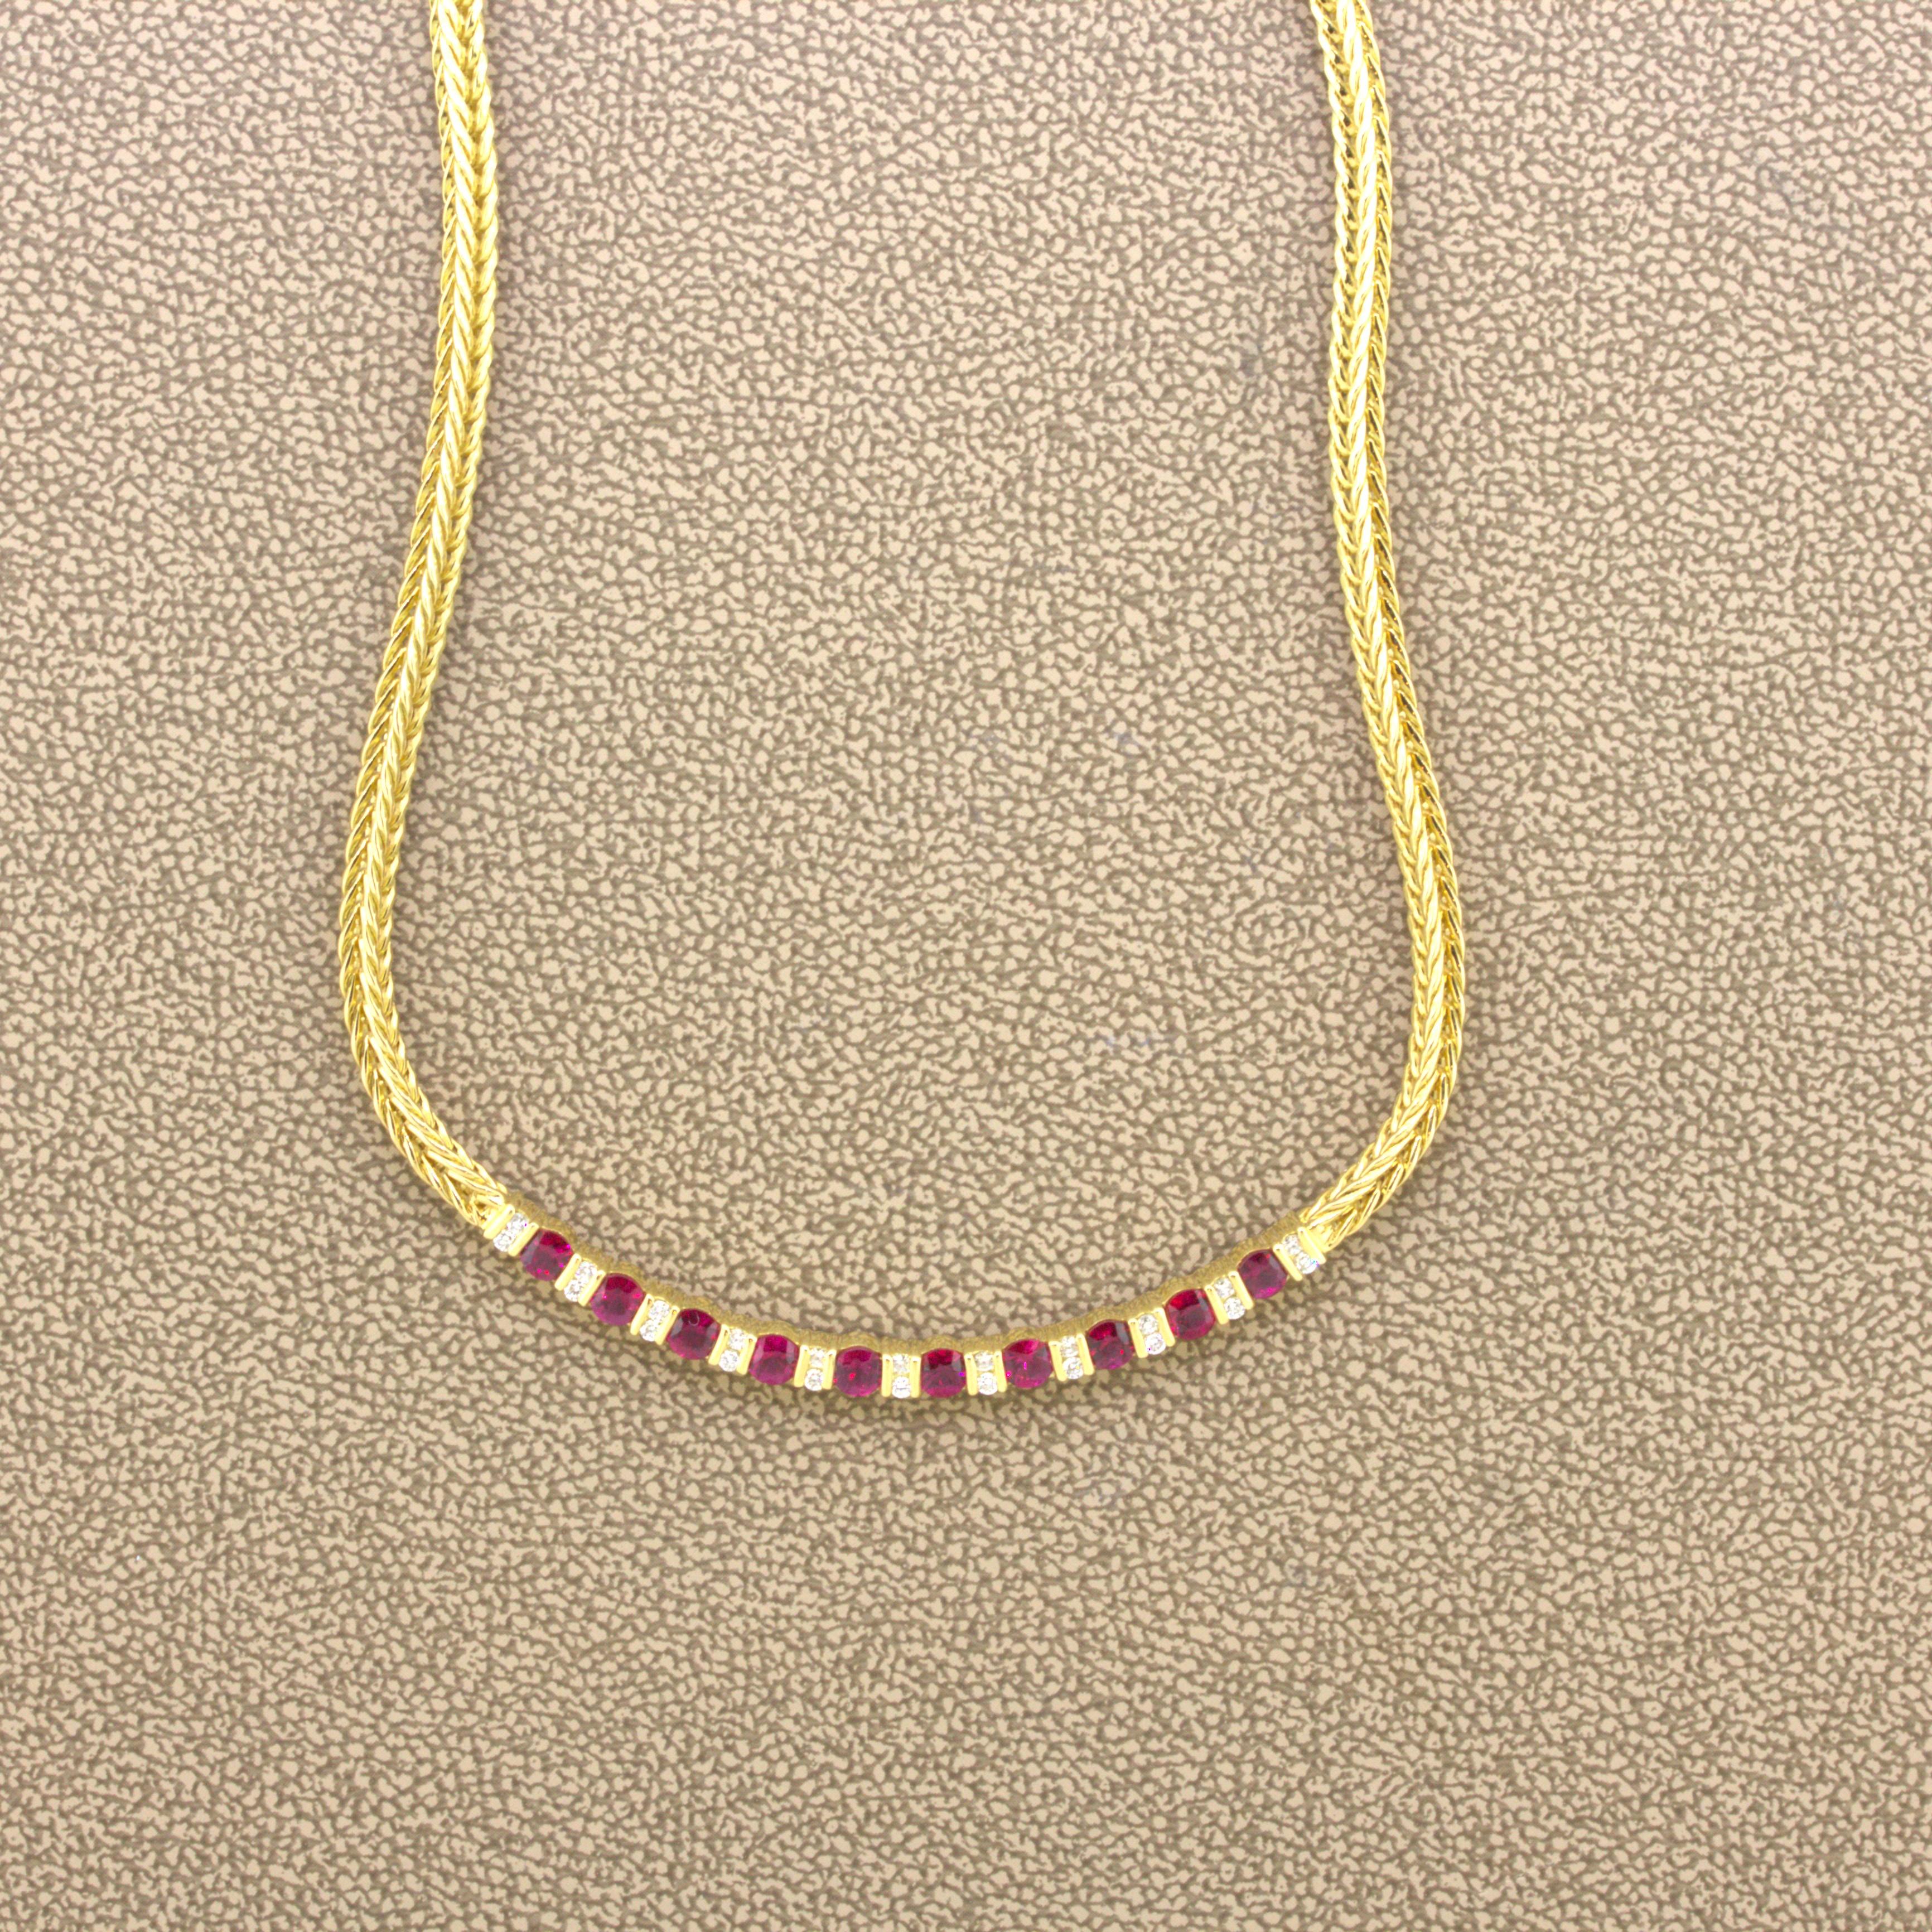 Round Cut Gemlok Ruby Diamond 18k Yellow Gold Collar Necklace For Sale